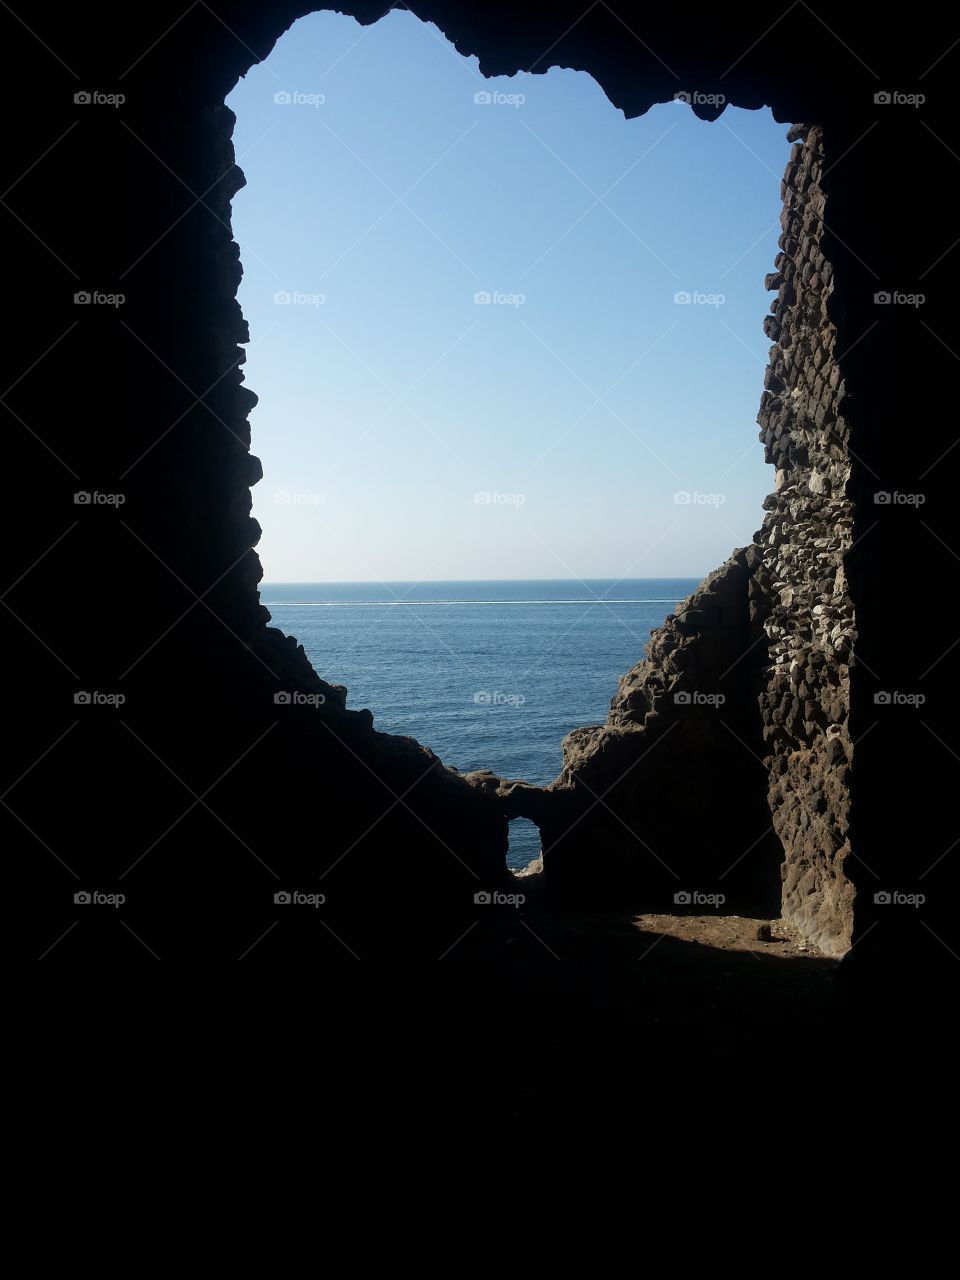 A window in the rocks to the sea